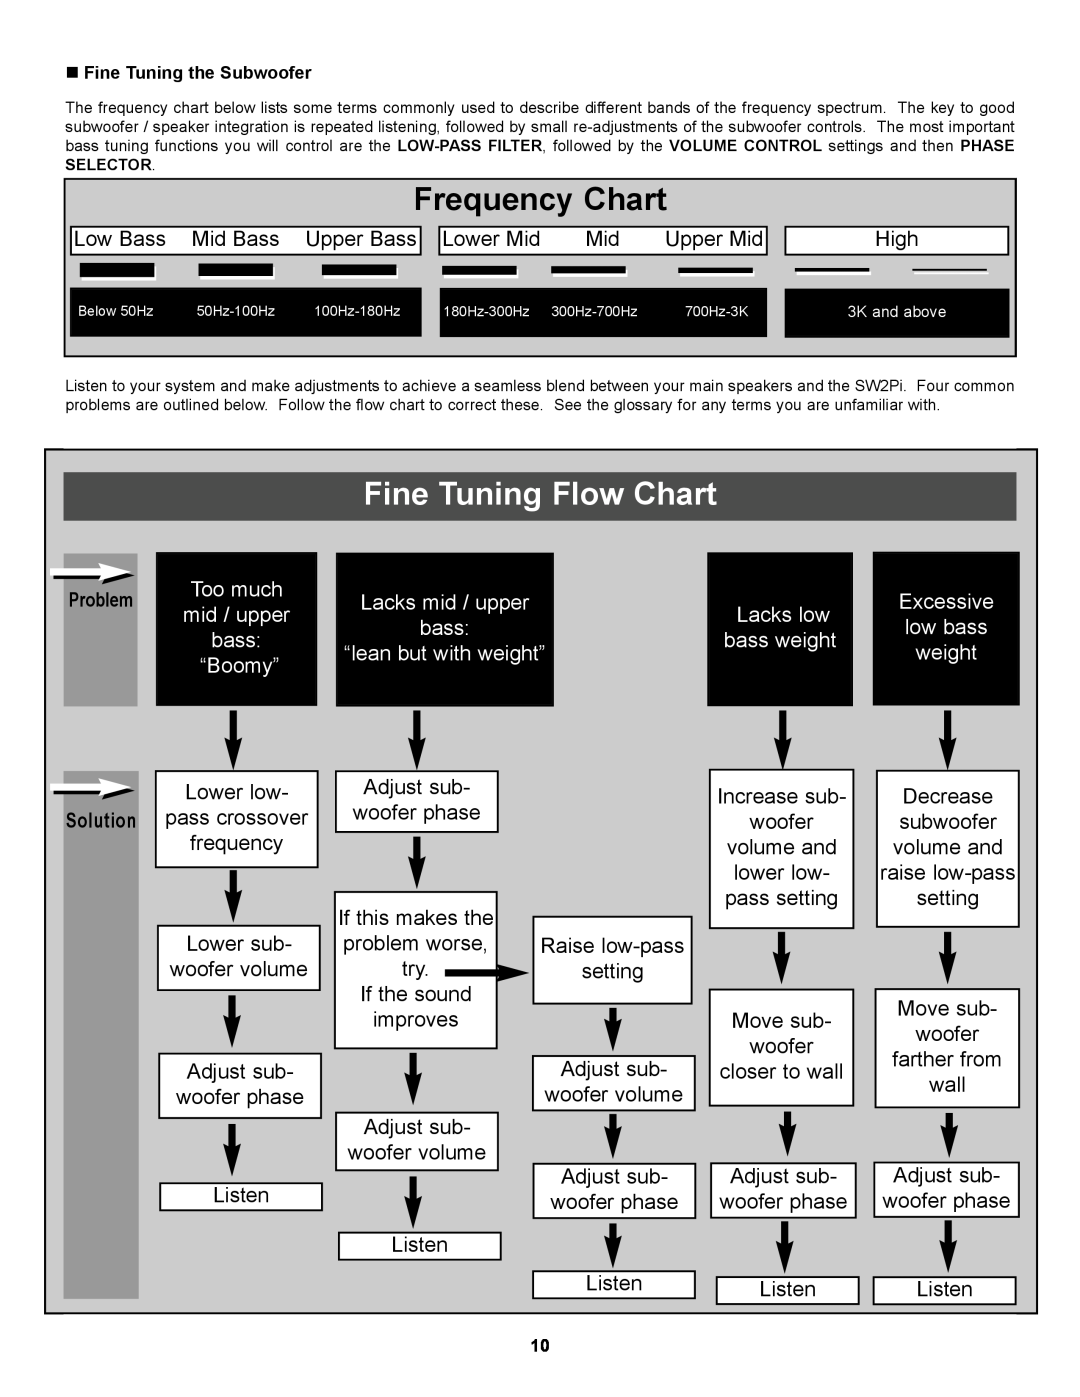 NHT SA-2 owner manual Frequency Chart, Fine Tuning Flow Chart, Solution 